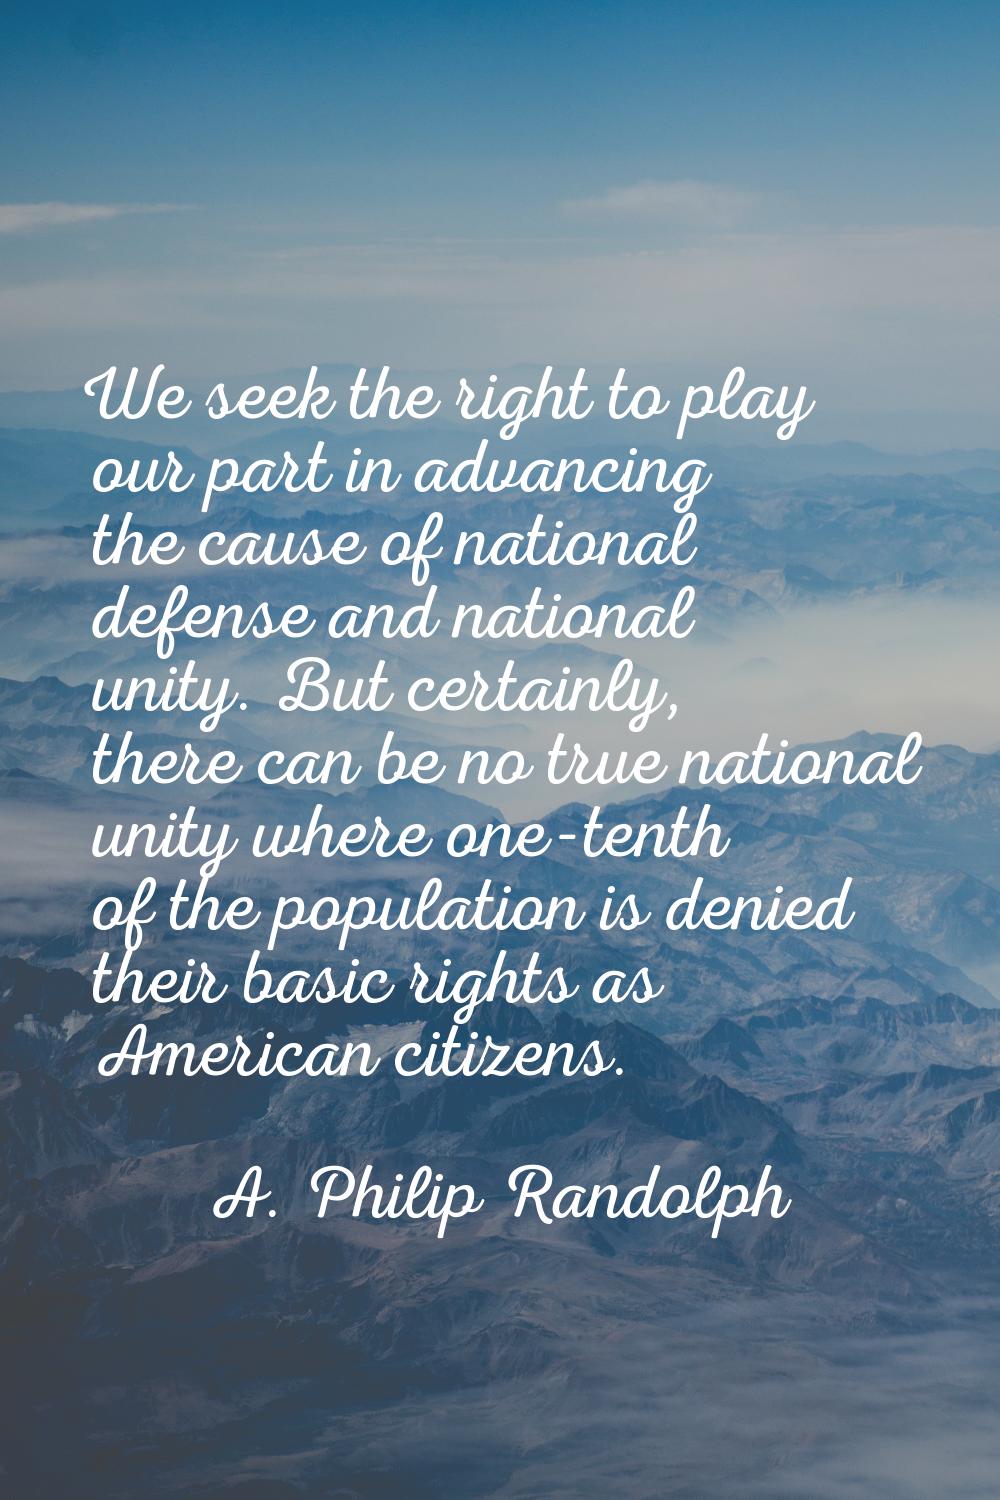 We seek the right to play our part in advancing the cause of national defense and national unity. B